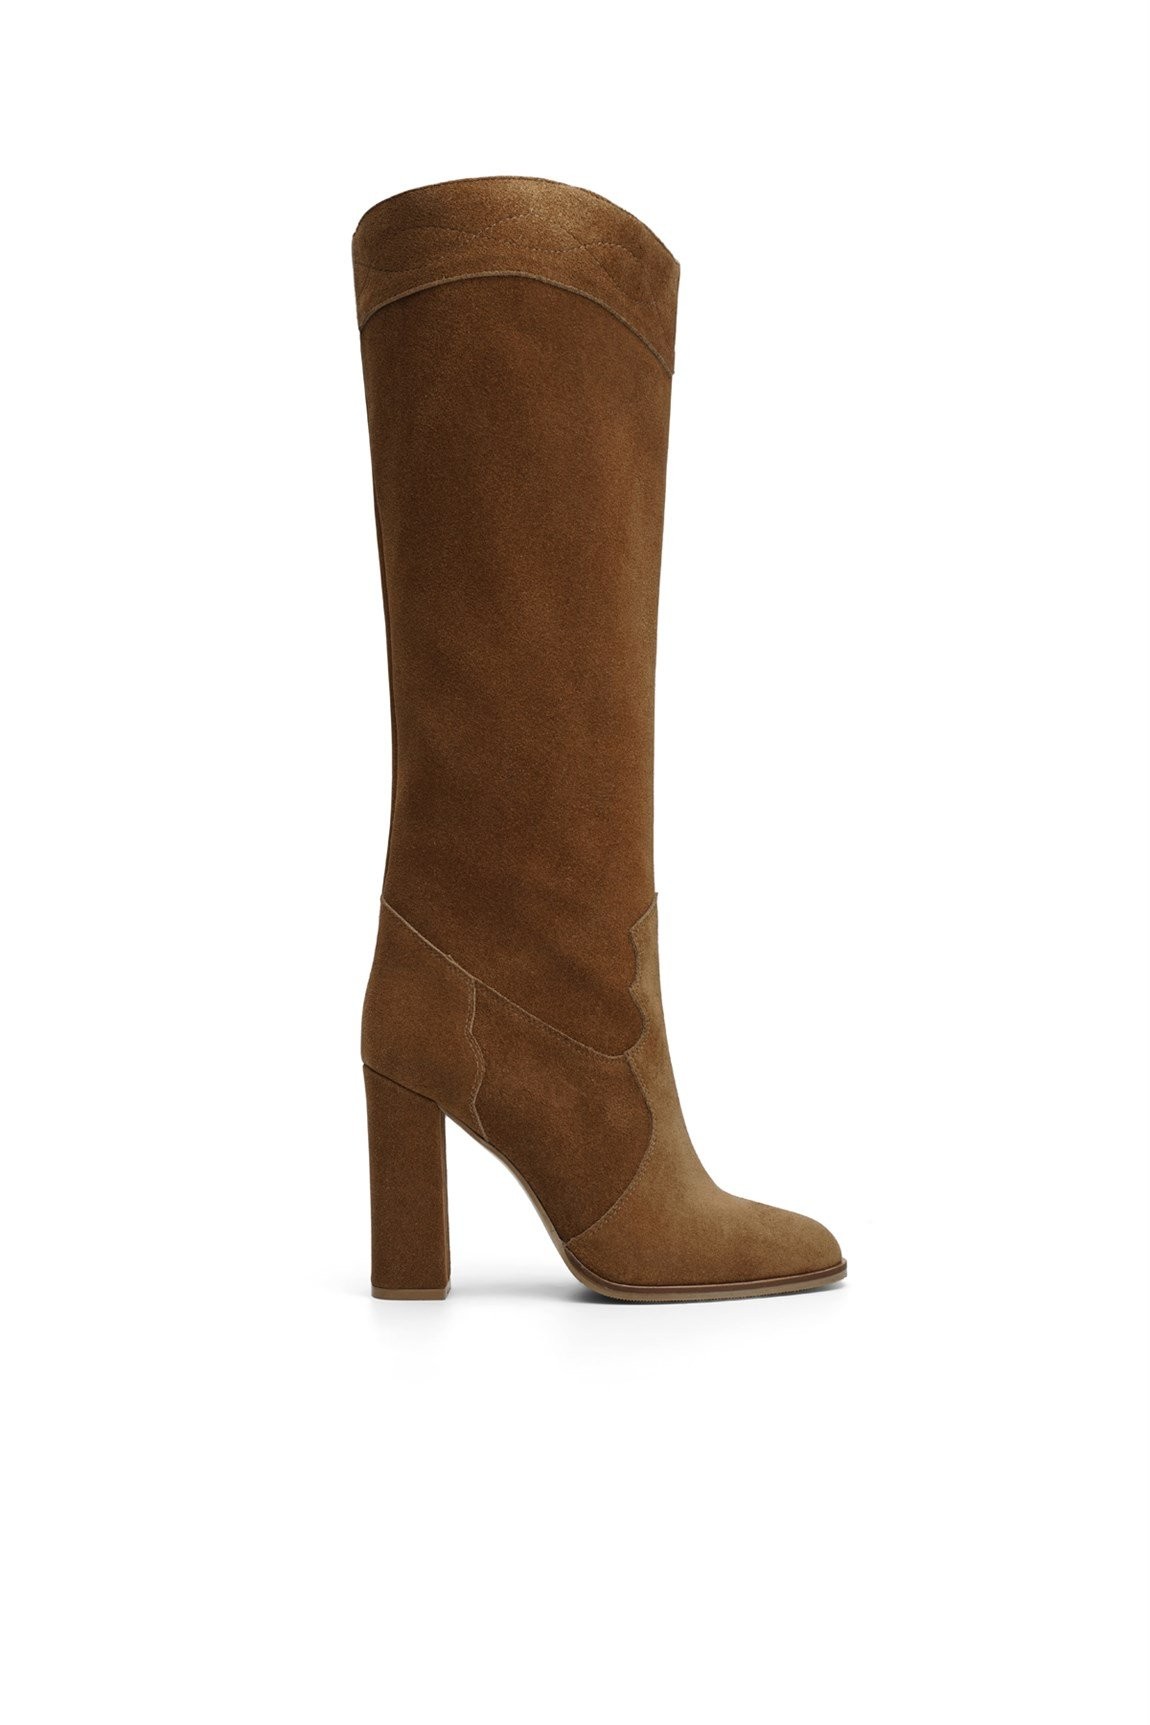 Jabotter Westy Tan Suede Heeled Boots